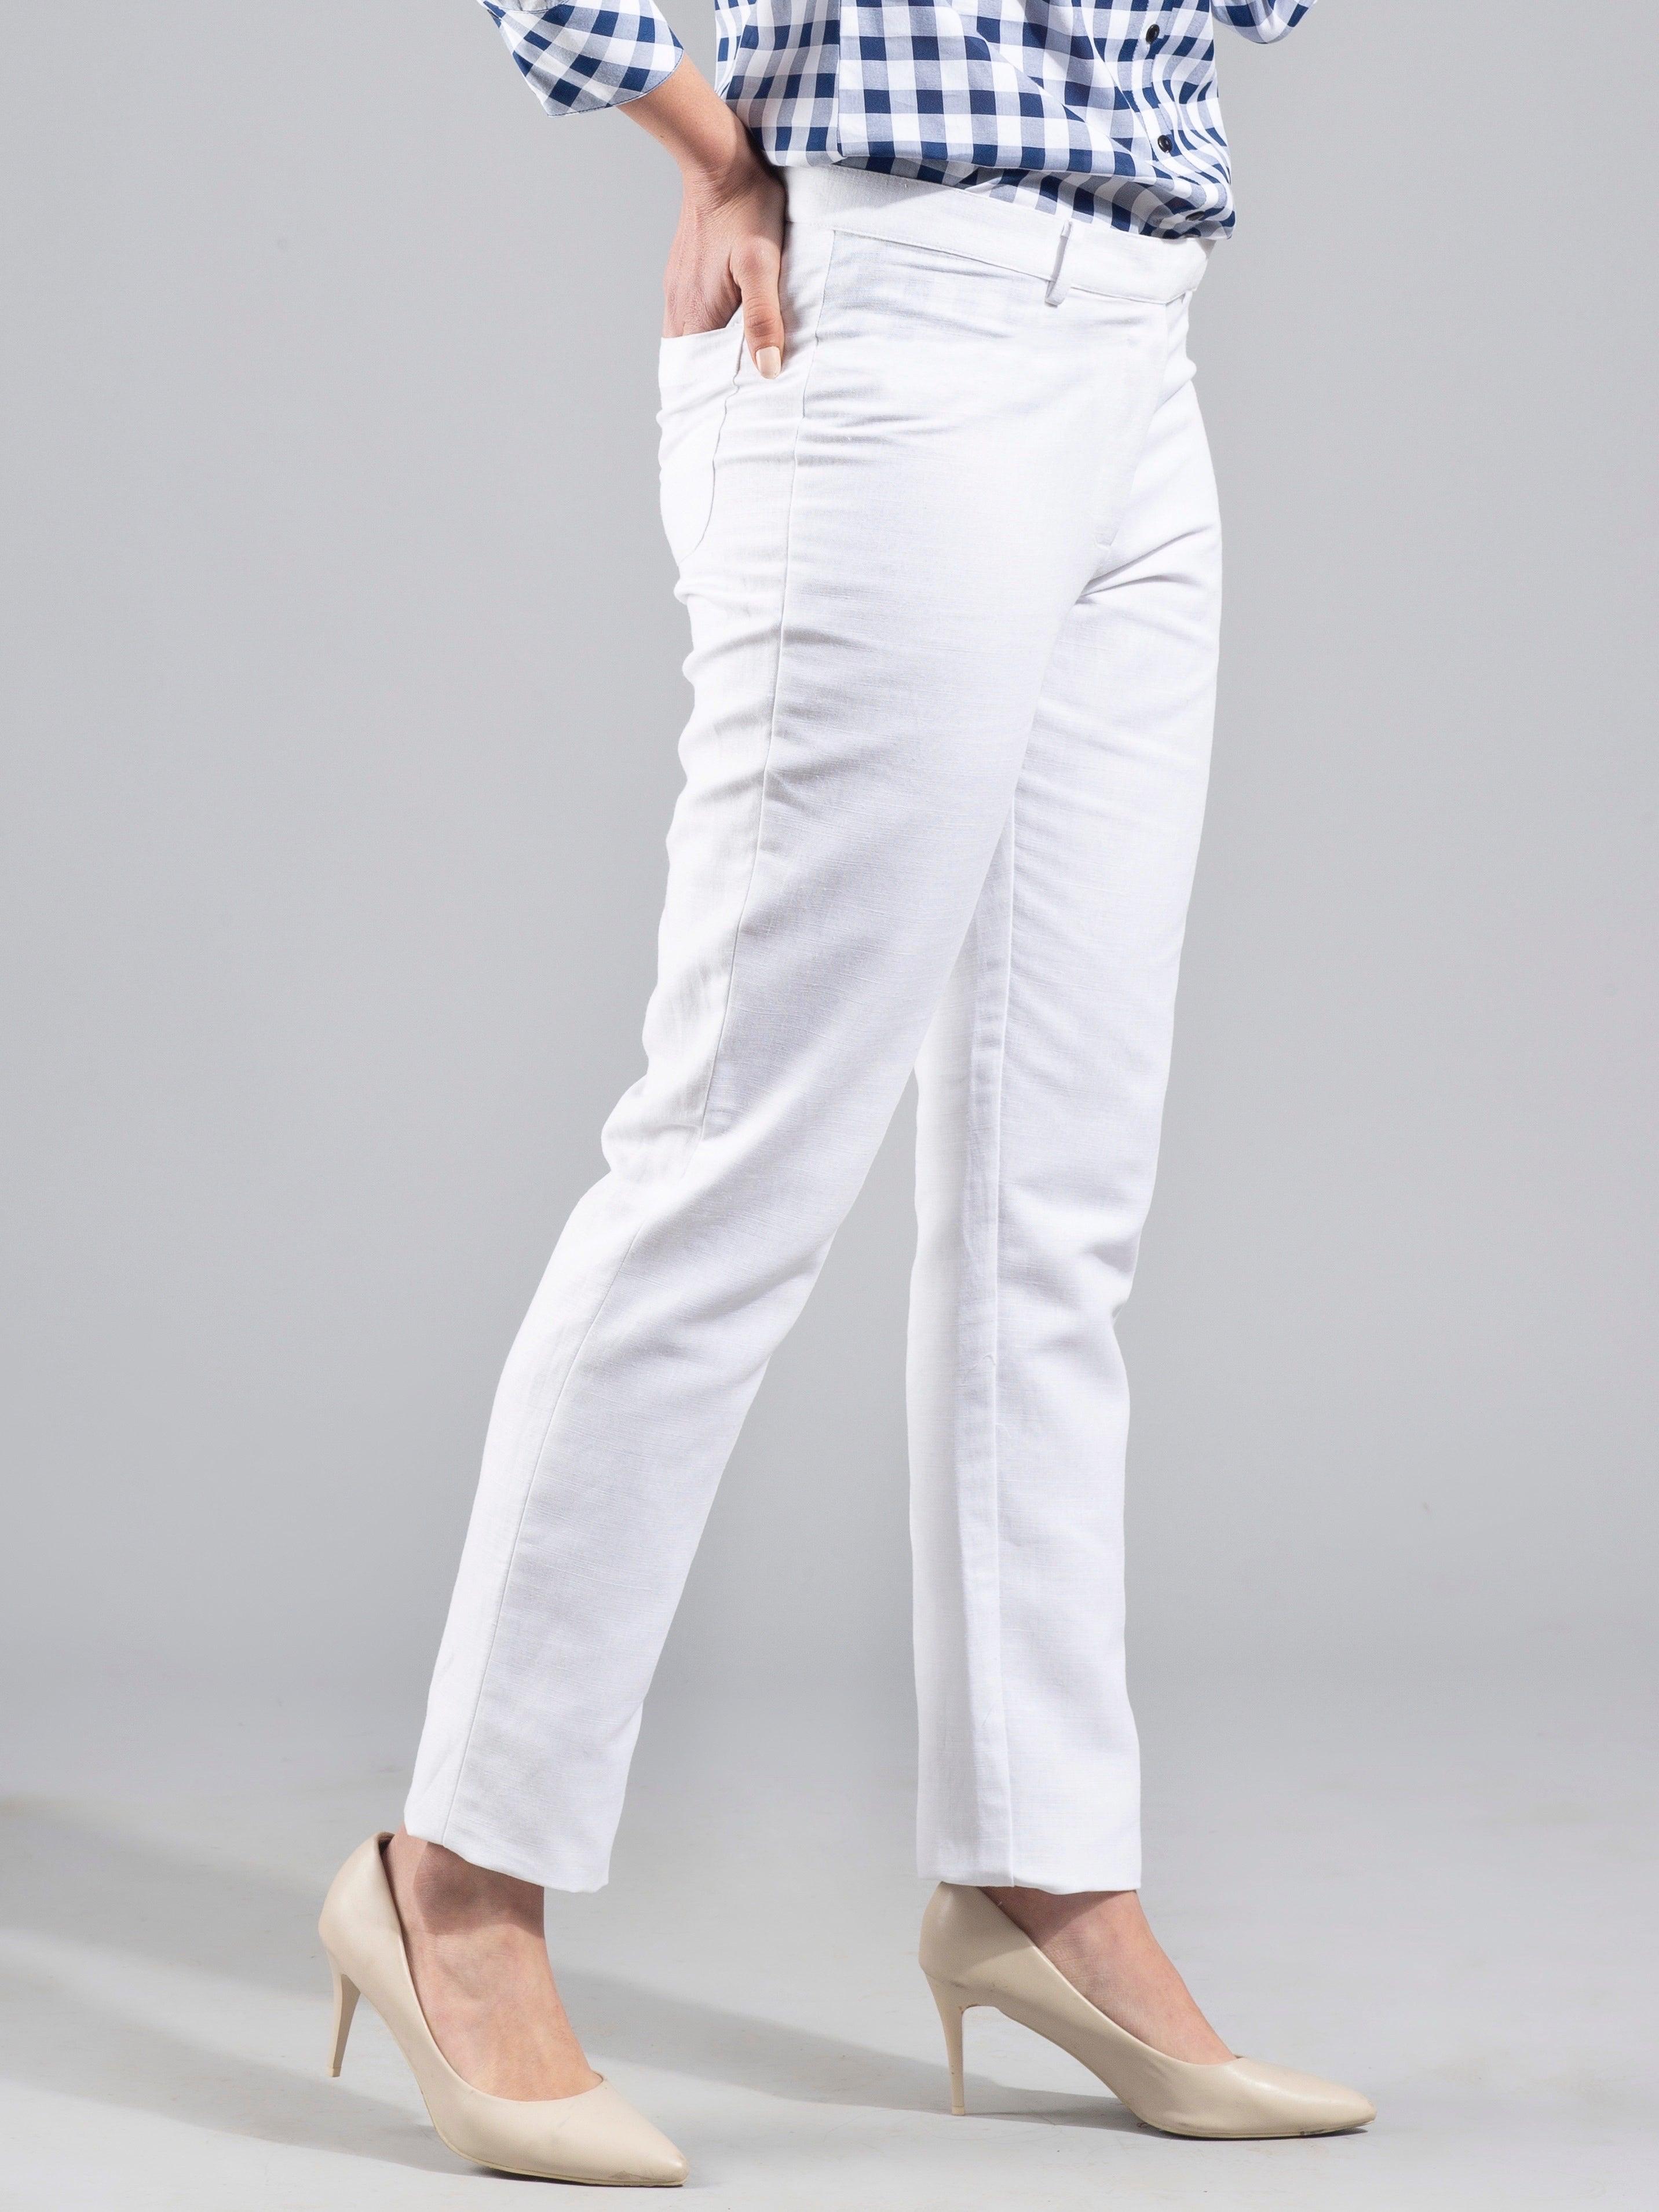 Essential Linen Trousers - White| Formal Trousers